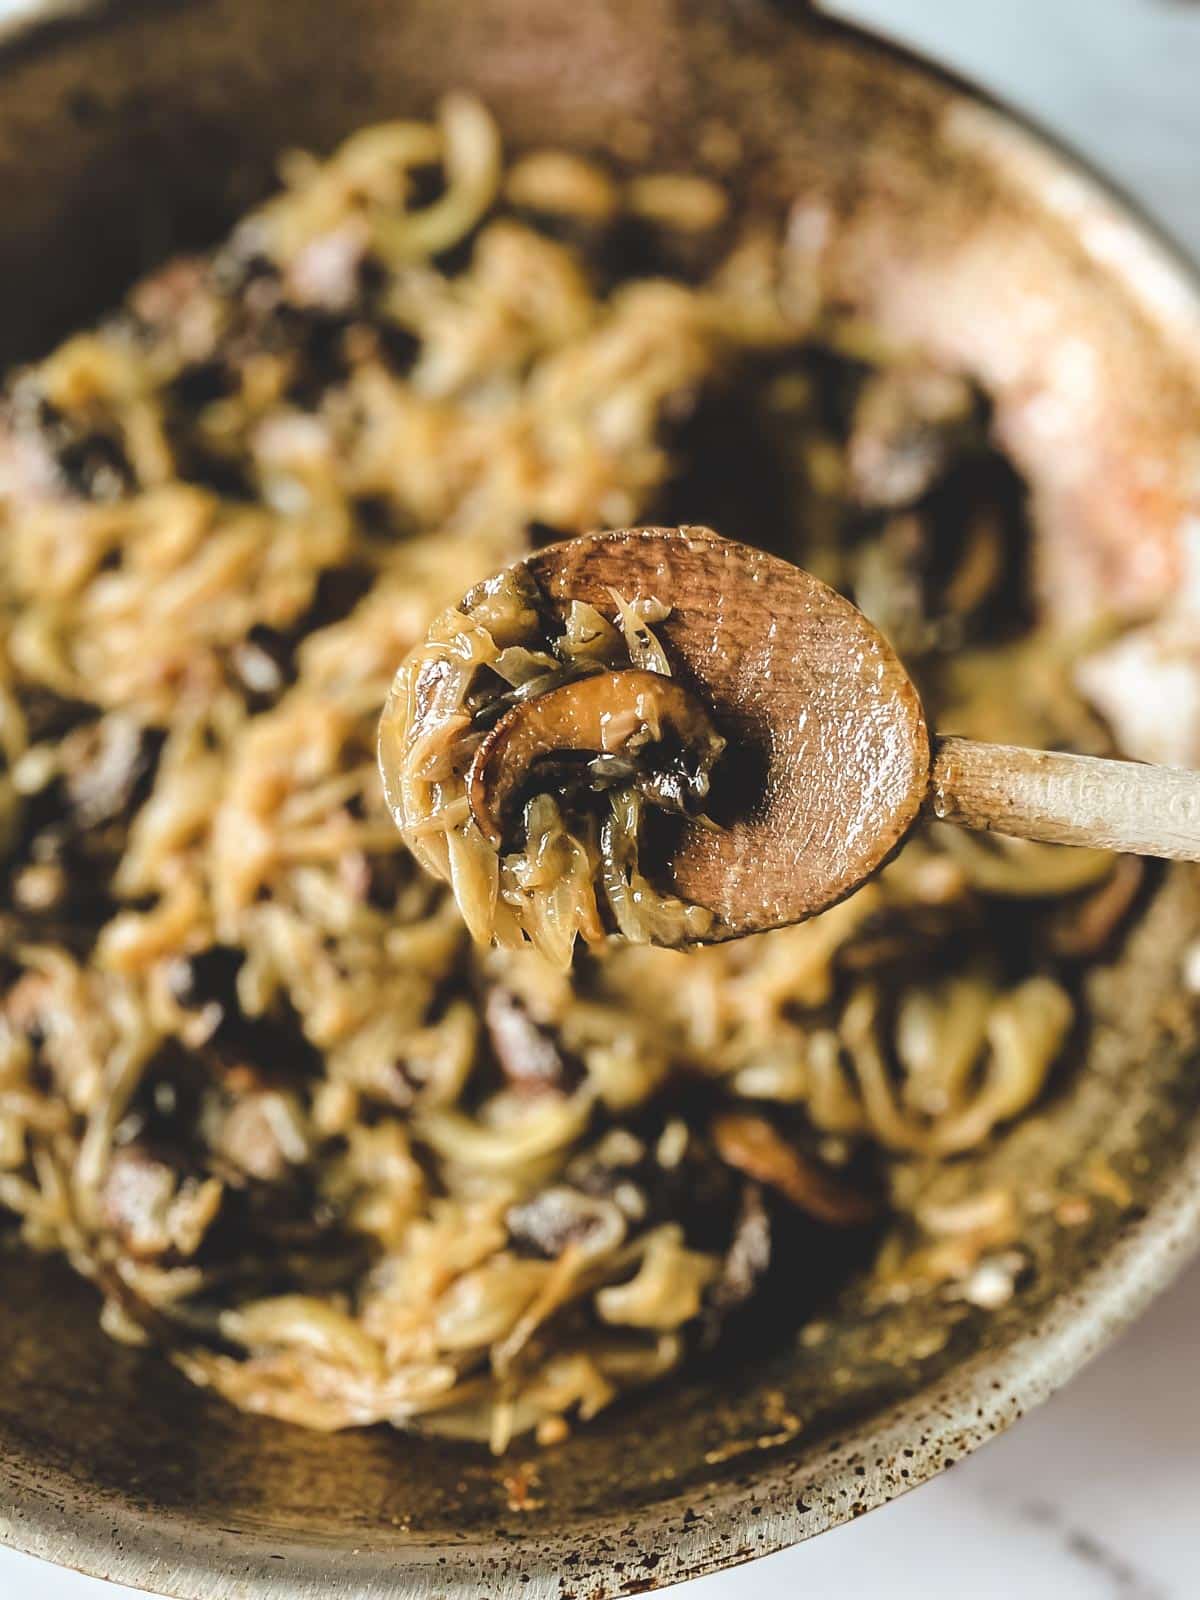 A wooden spoon offers a closeup view of caramelized mushrooms and onions above a pan in the background.